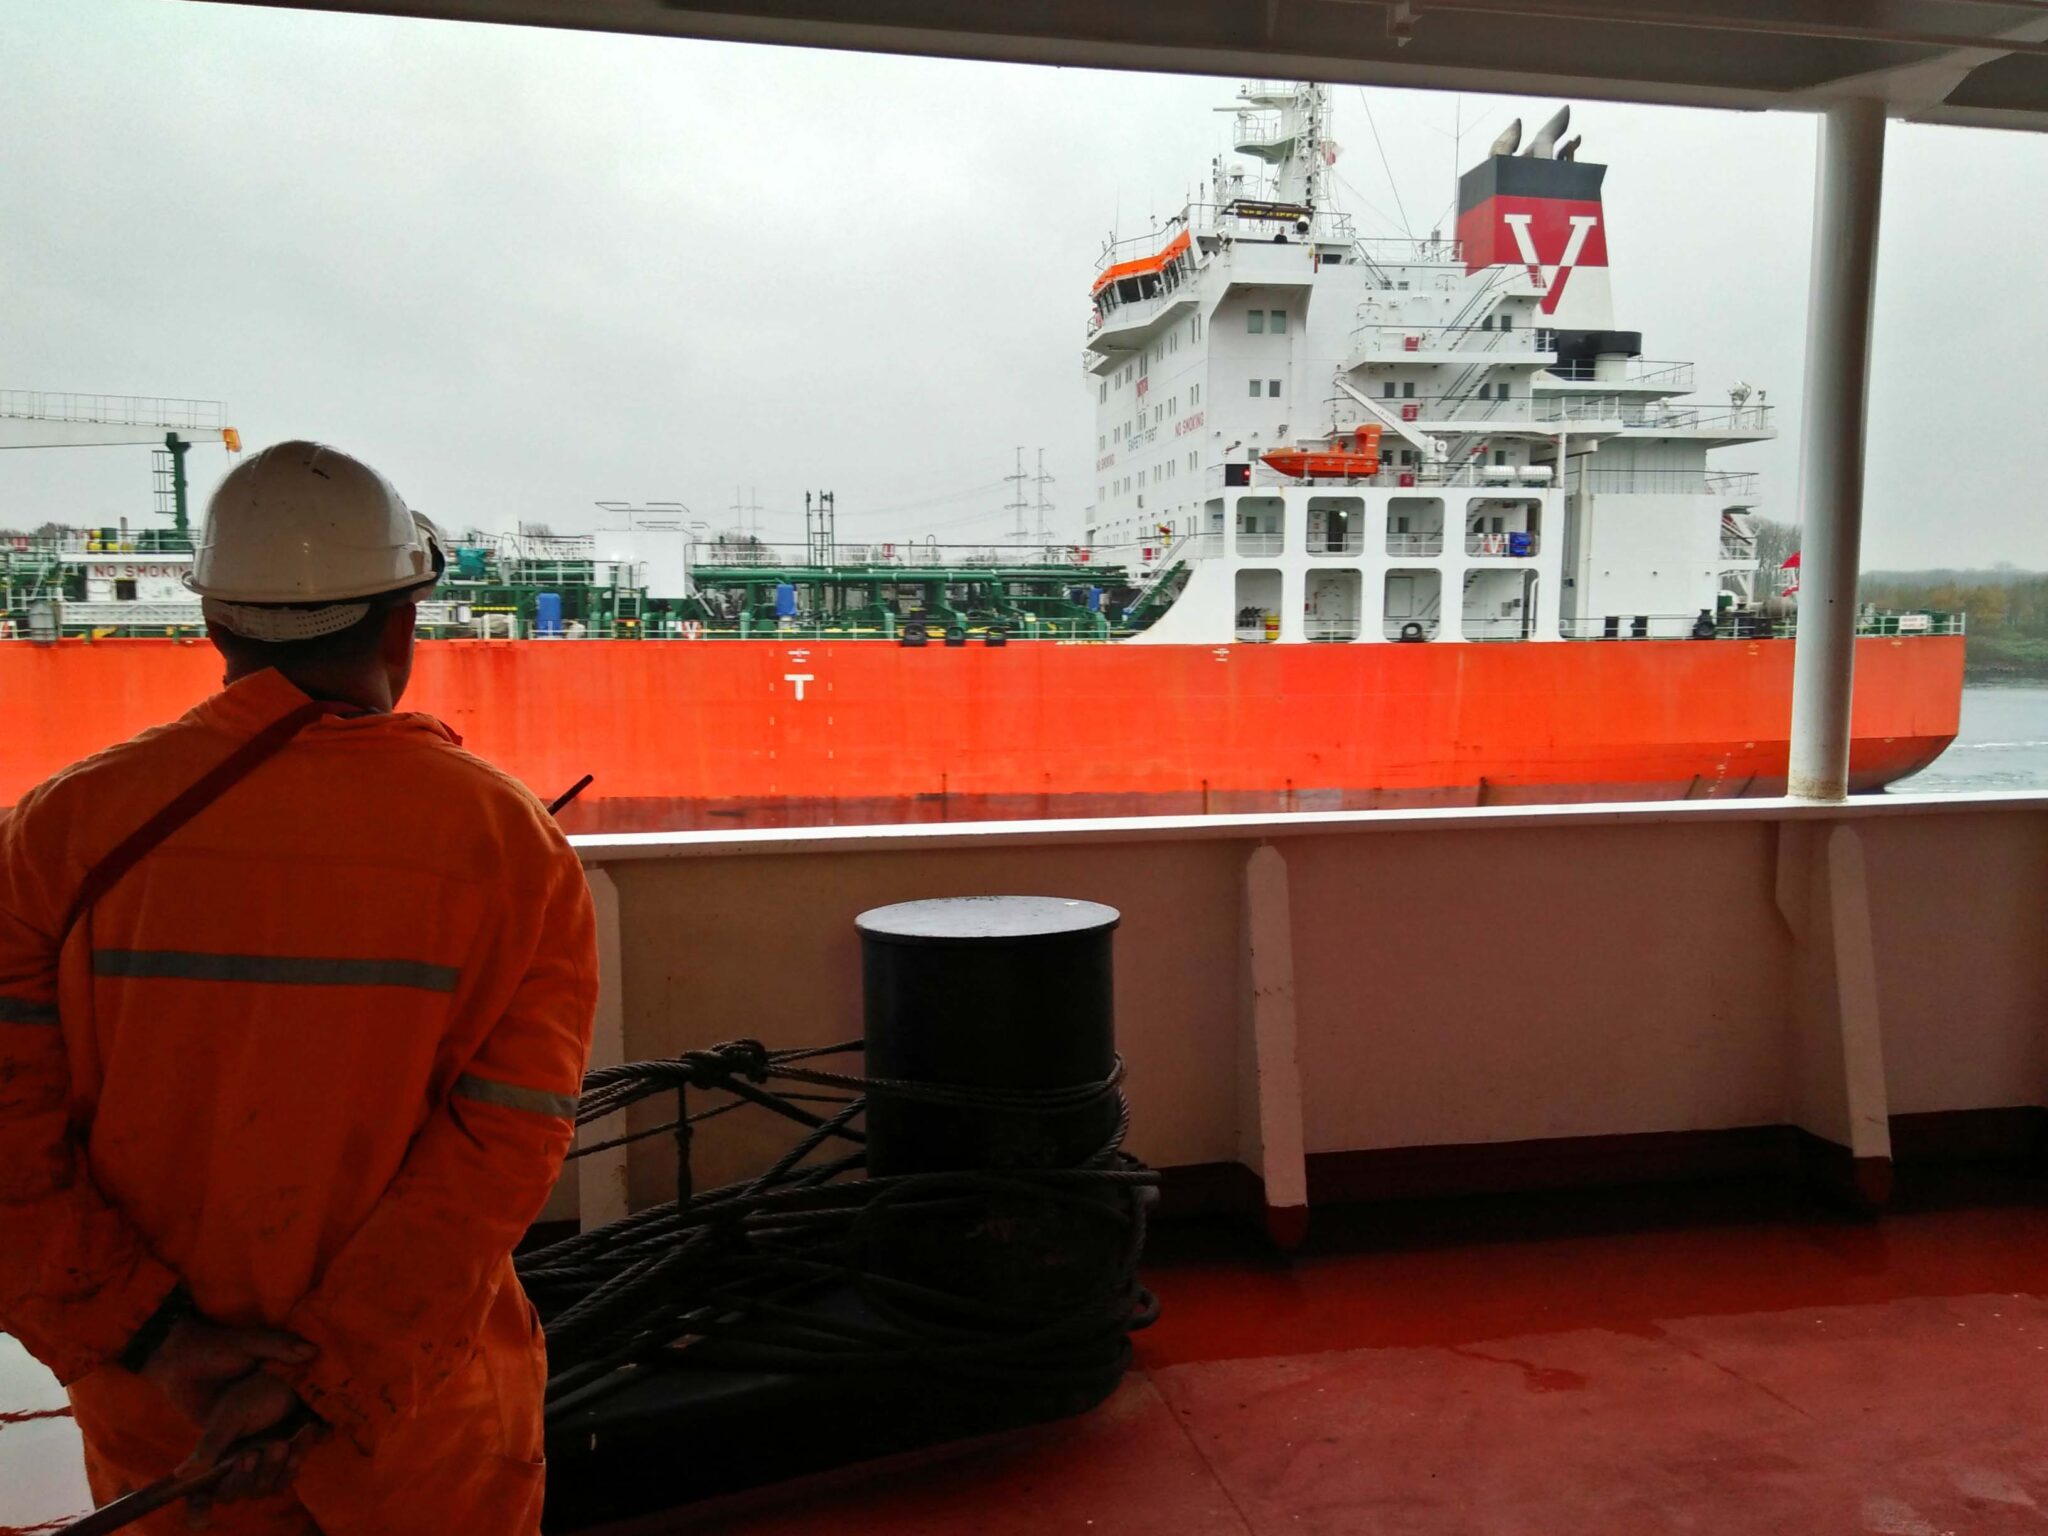 A seafarer in orange coverall on board watching another tanker vessel pass by.